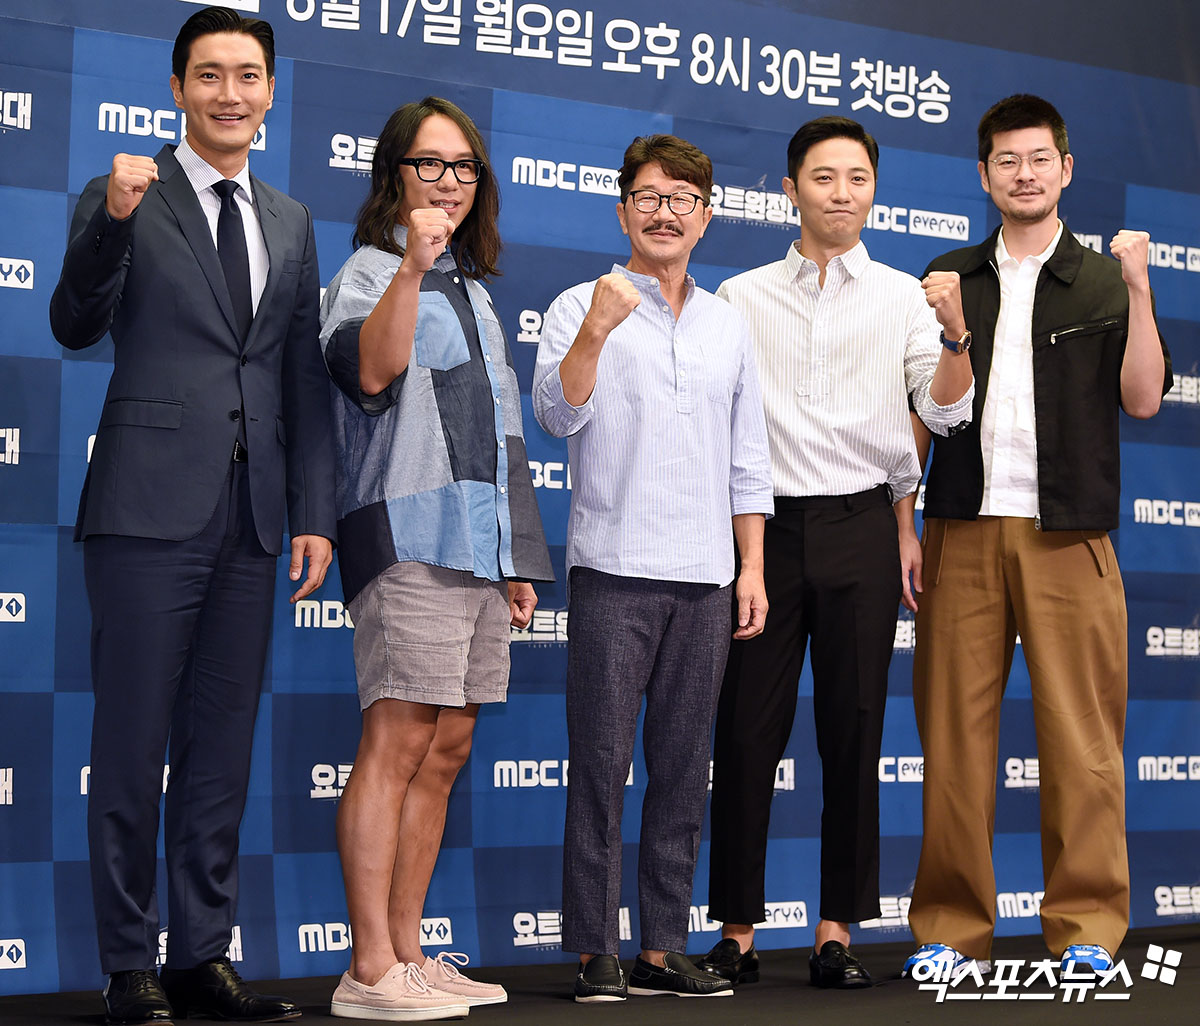 Choi Siwon, Song Ho-joon, Sea captain Kim Seung-jin, Jingu and Jang Ha have photo time at the MBC Everlon Yot Expedition production presentation held at Stanford Hotel in Sangam-dong, Seoul on the 12th.